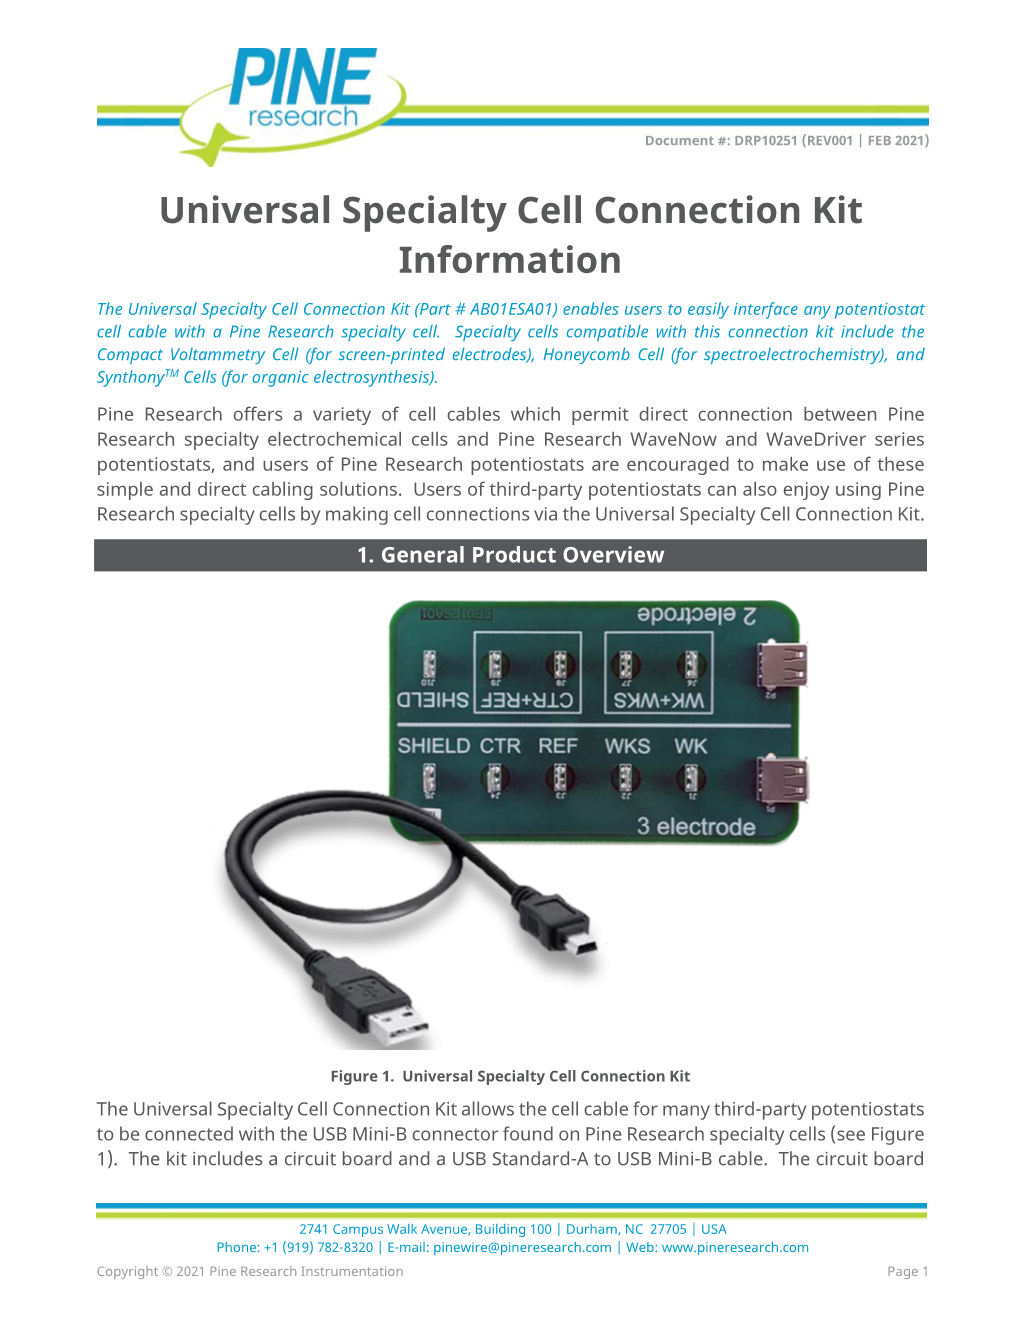 Universal Specialty Cell Connection Kit Information